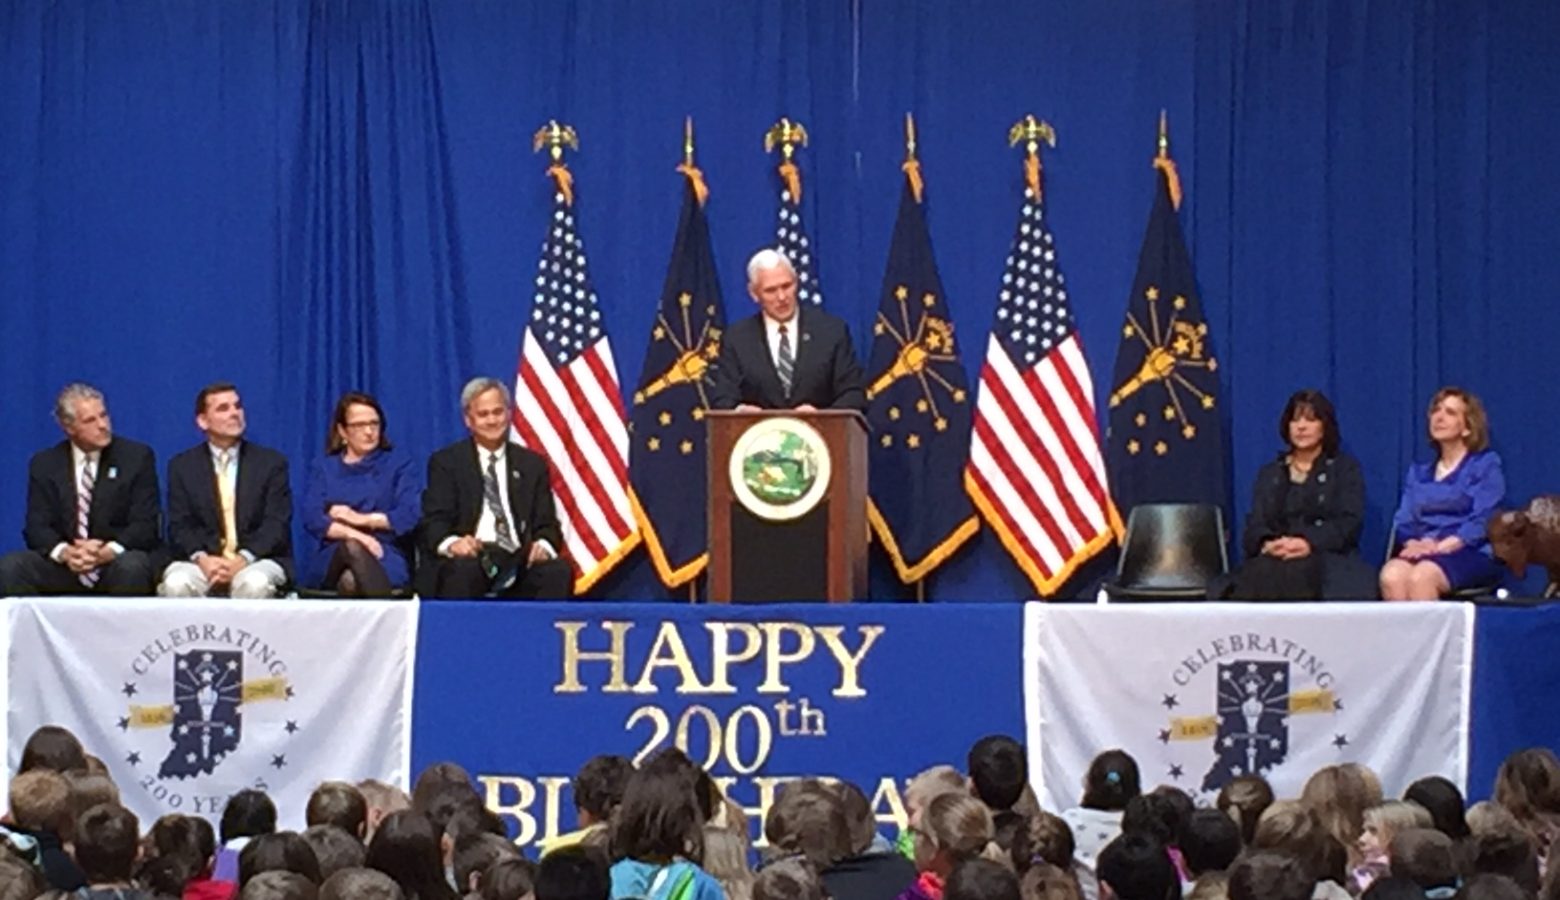 Governor (and Vice President-elect) Mike Pence speaks to students from around Indiana during the Bicentennial Statehood Day celebration at the Statehouse. (Brandon Smith/IPB News)